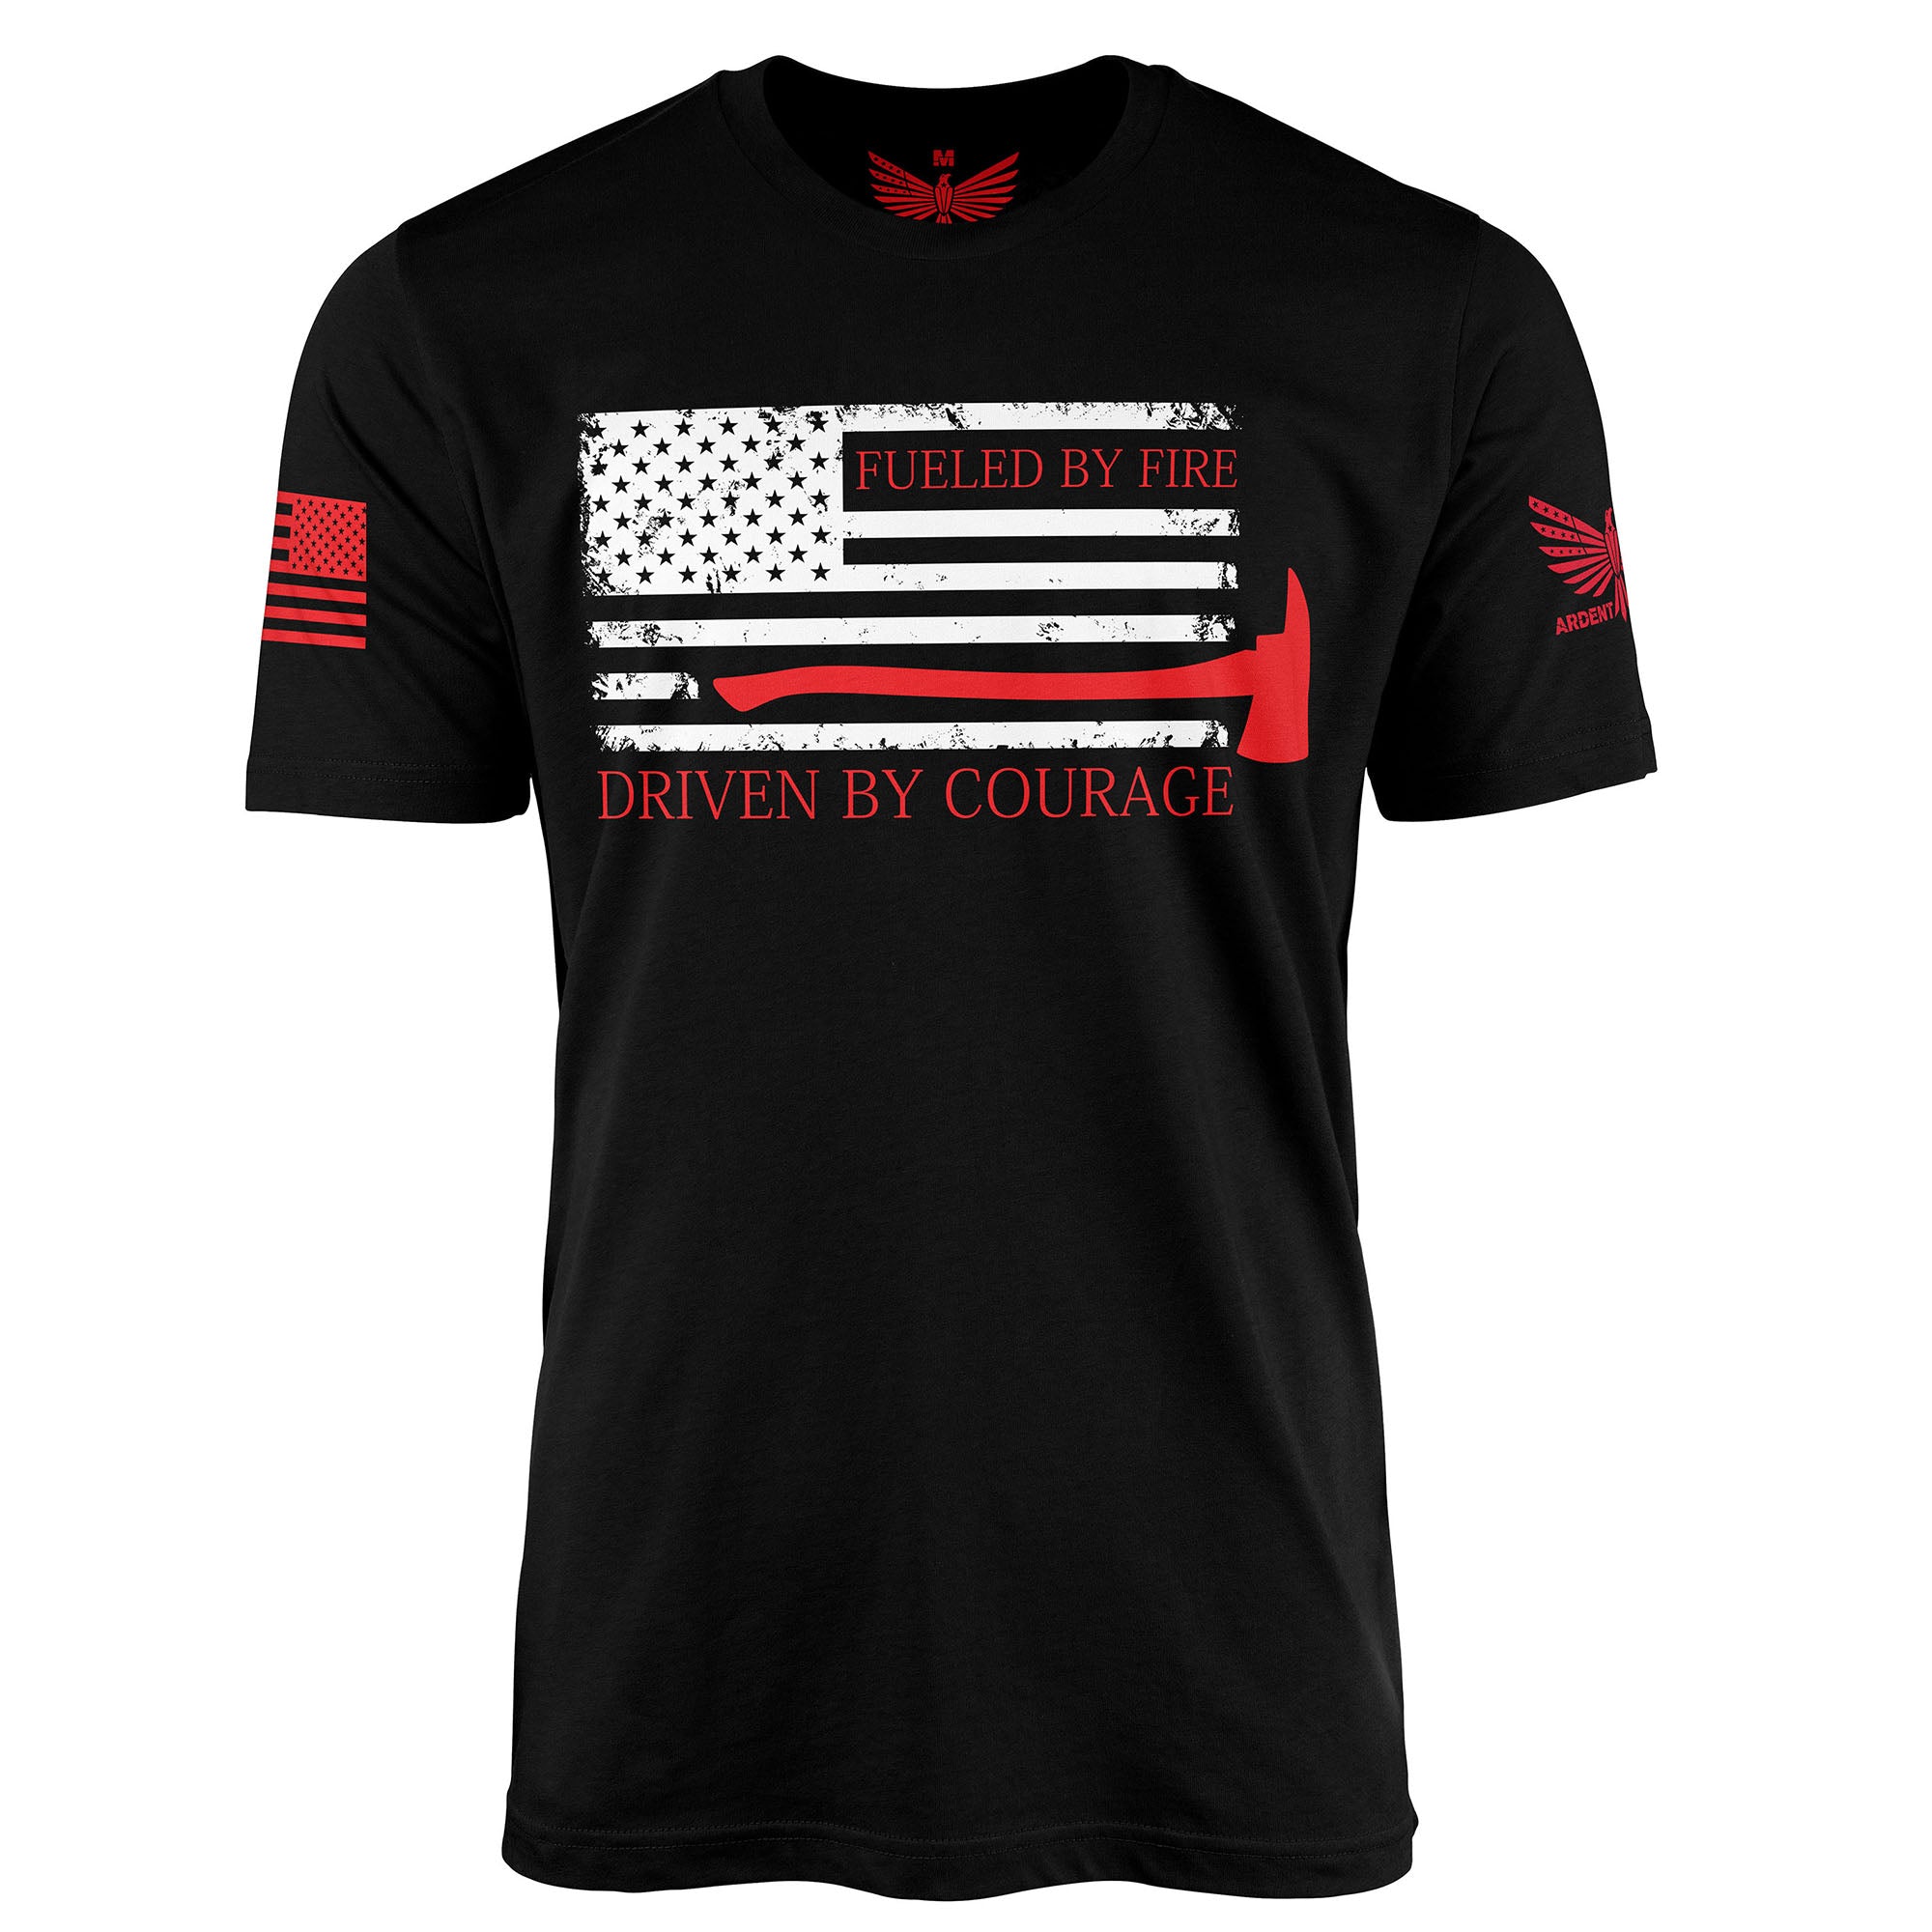 Fueled By Fire-Men's Shirt-S-Ardent Patriot Apparel Co.